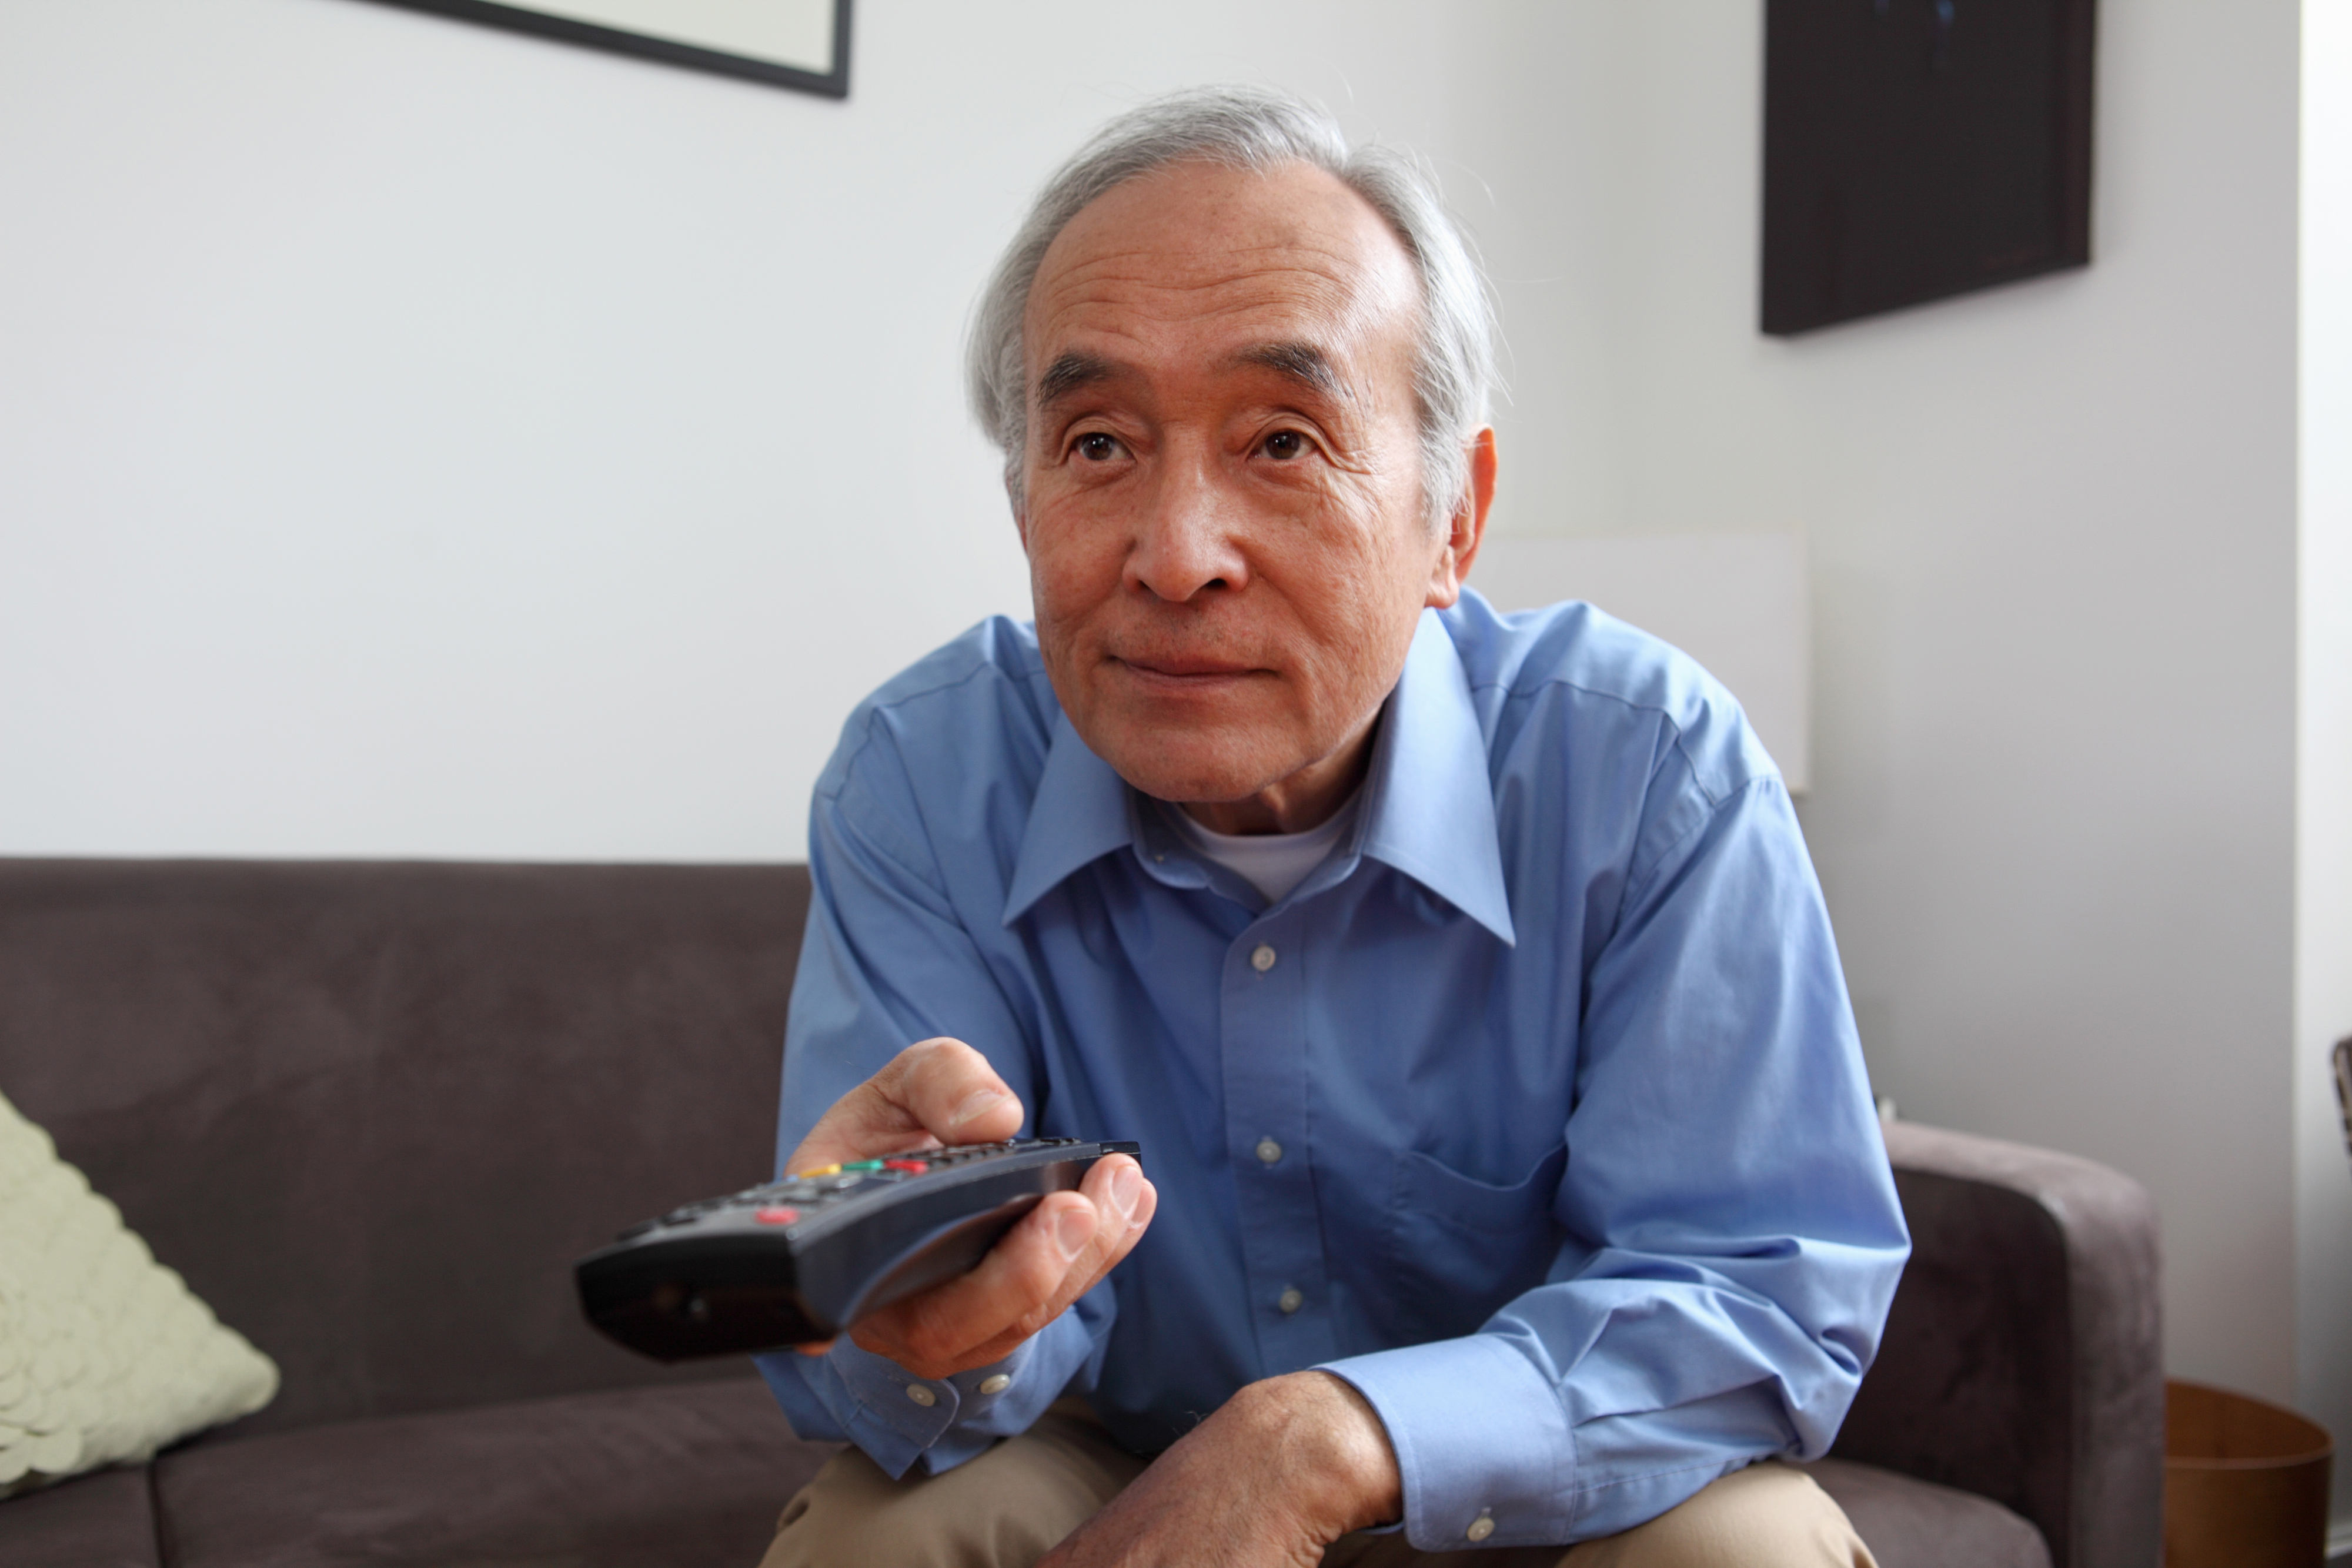 An older man with a television remote in his hand